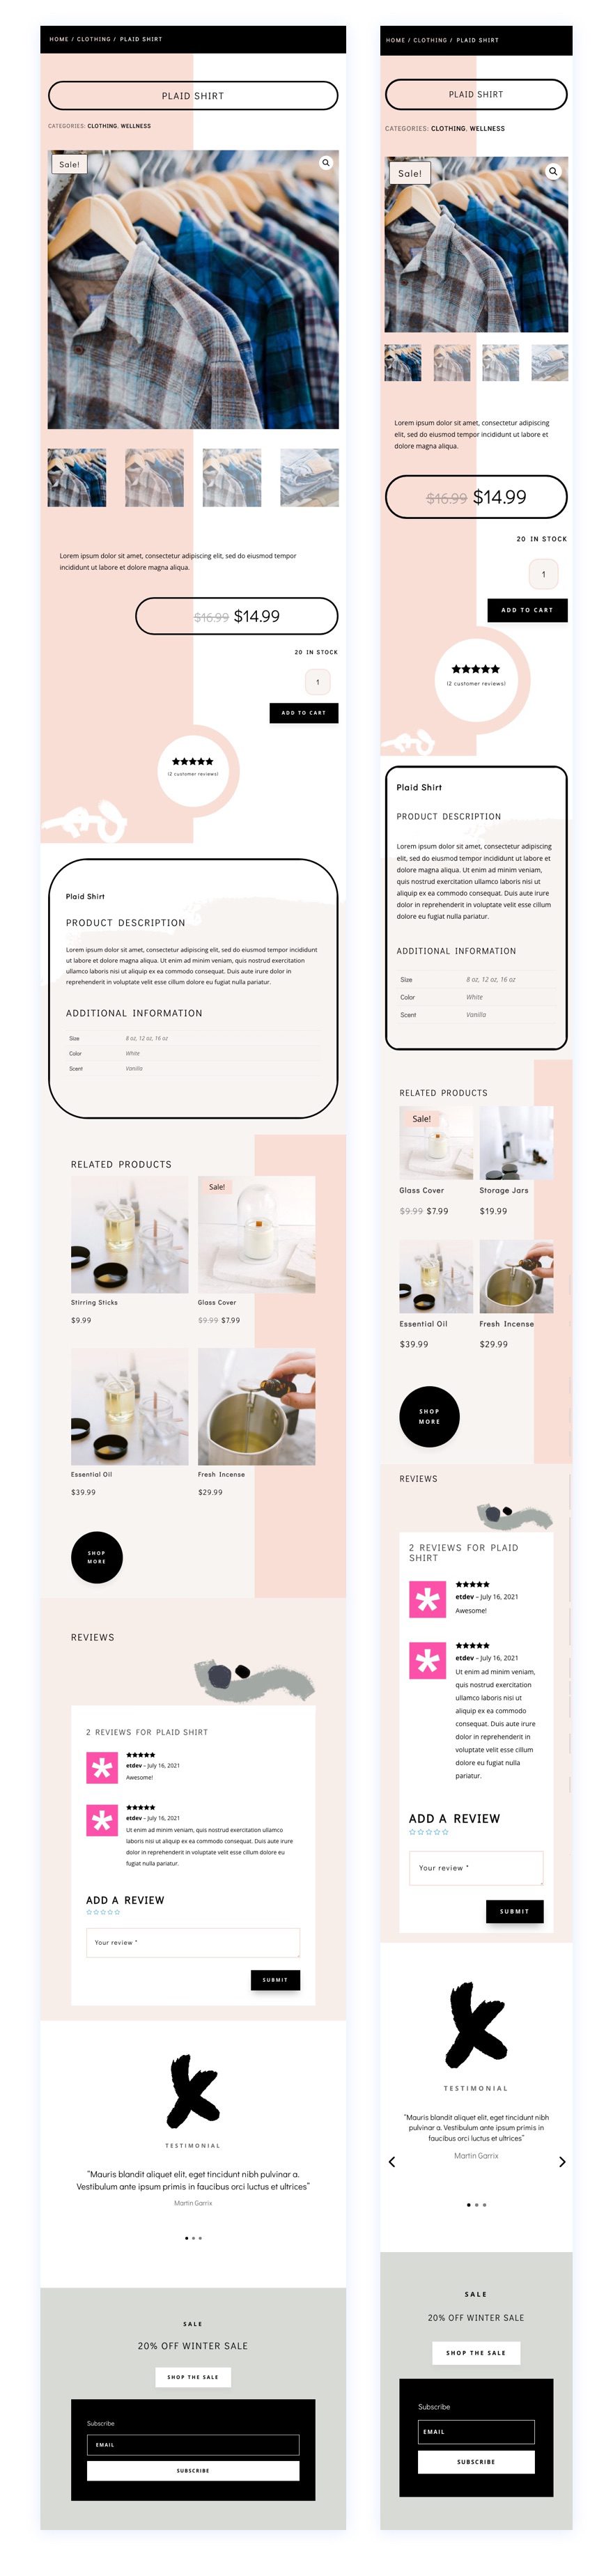 Download a FREE Product Page Template for Divi’s Clothing